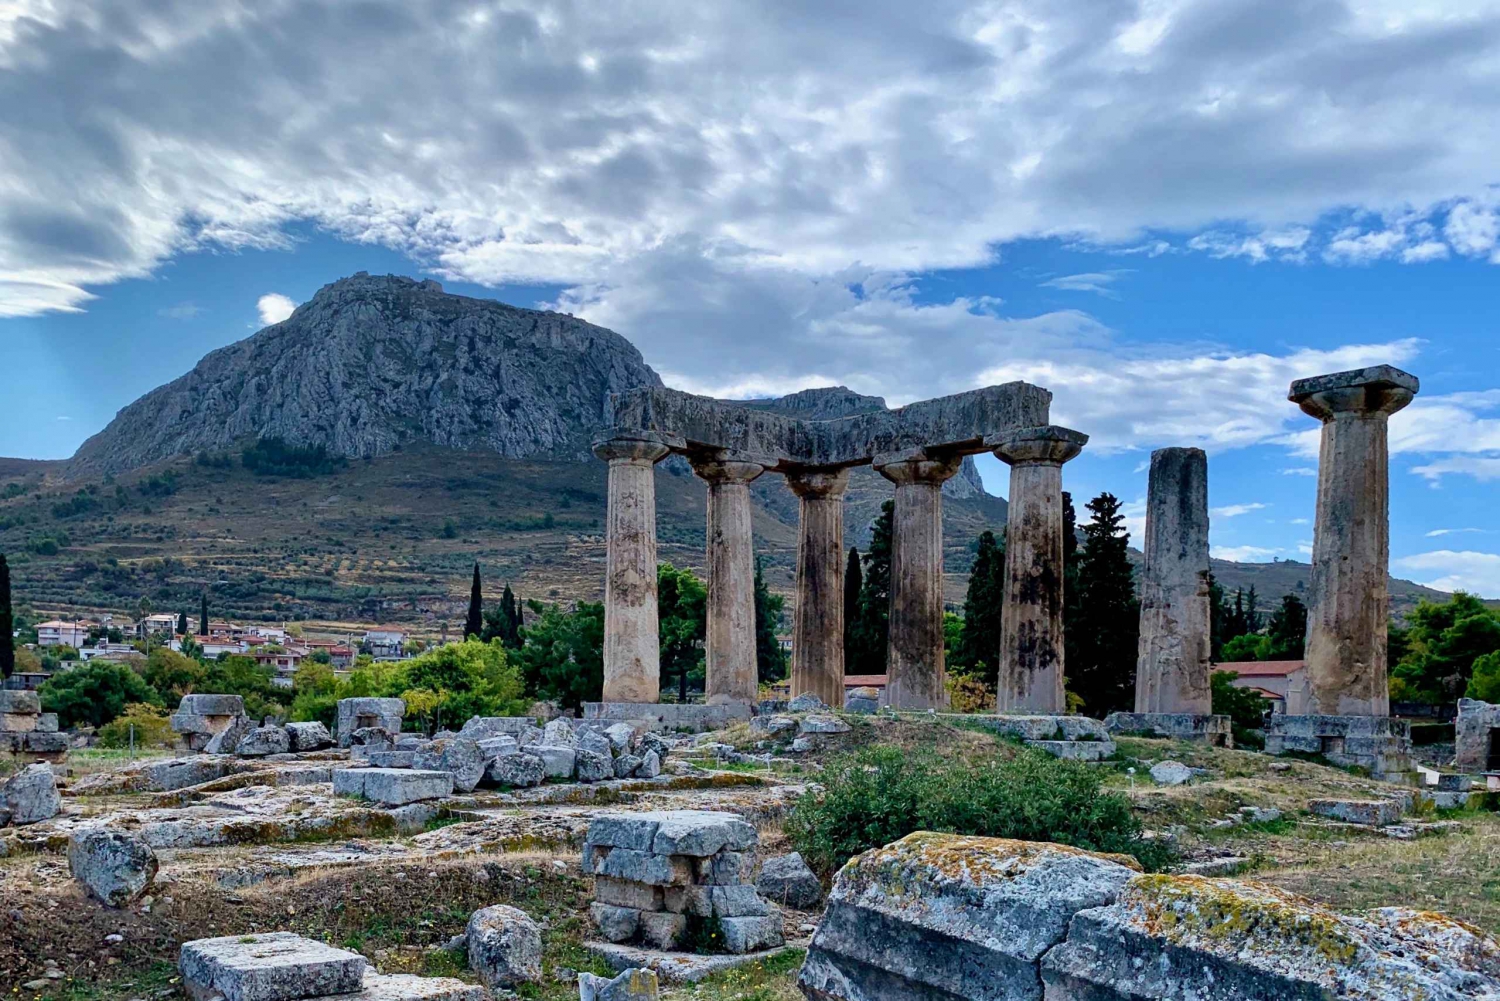 Corinth Private Excursion from Athens